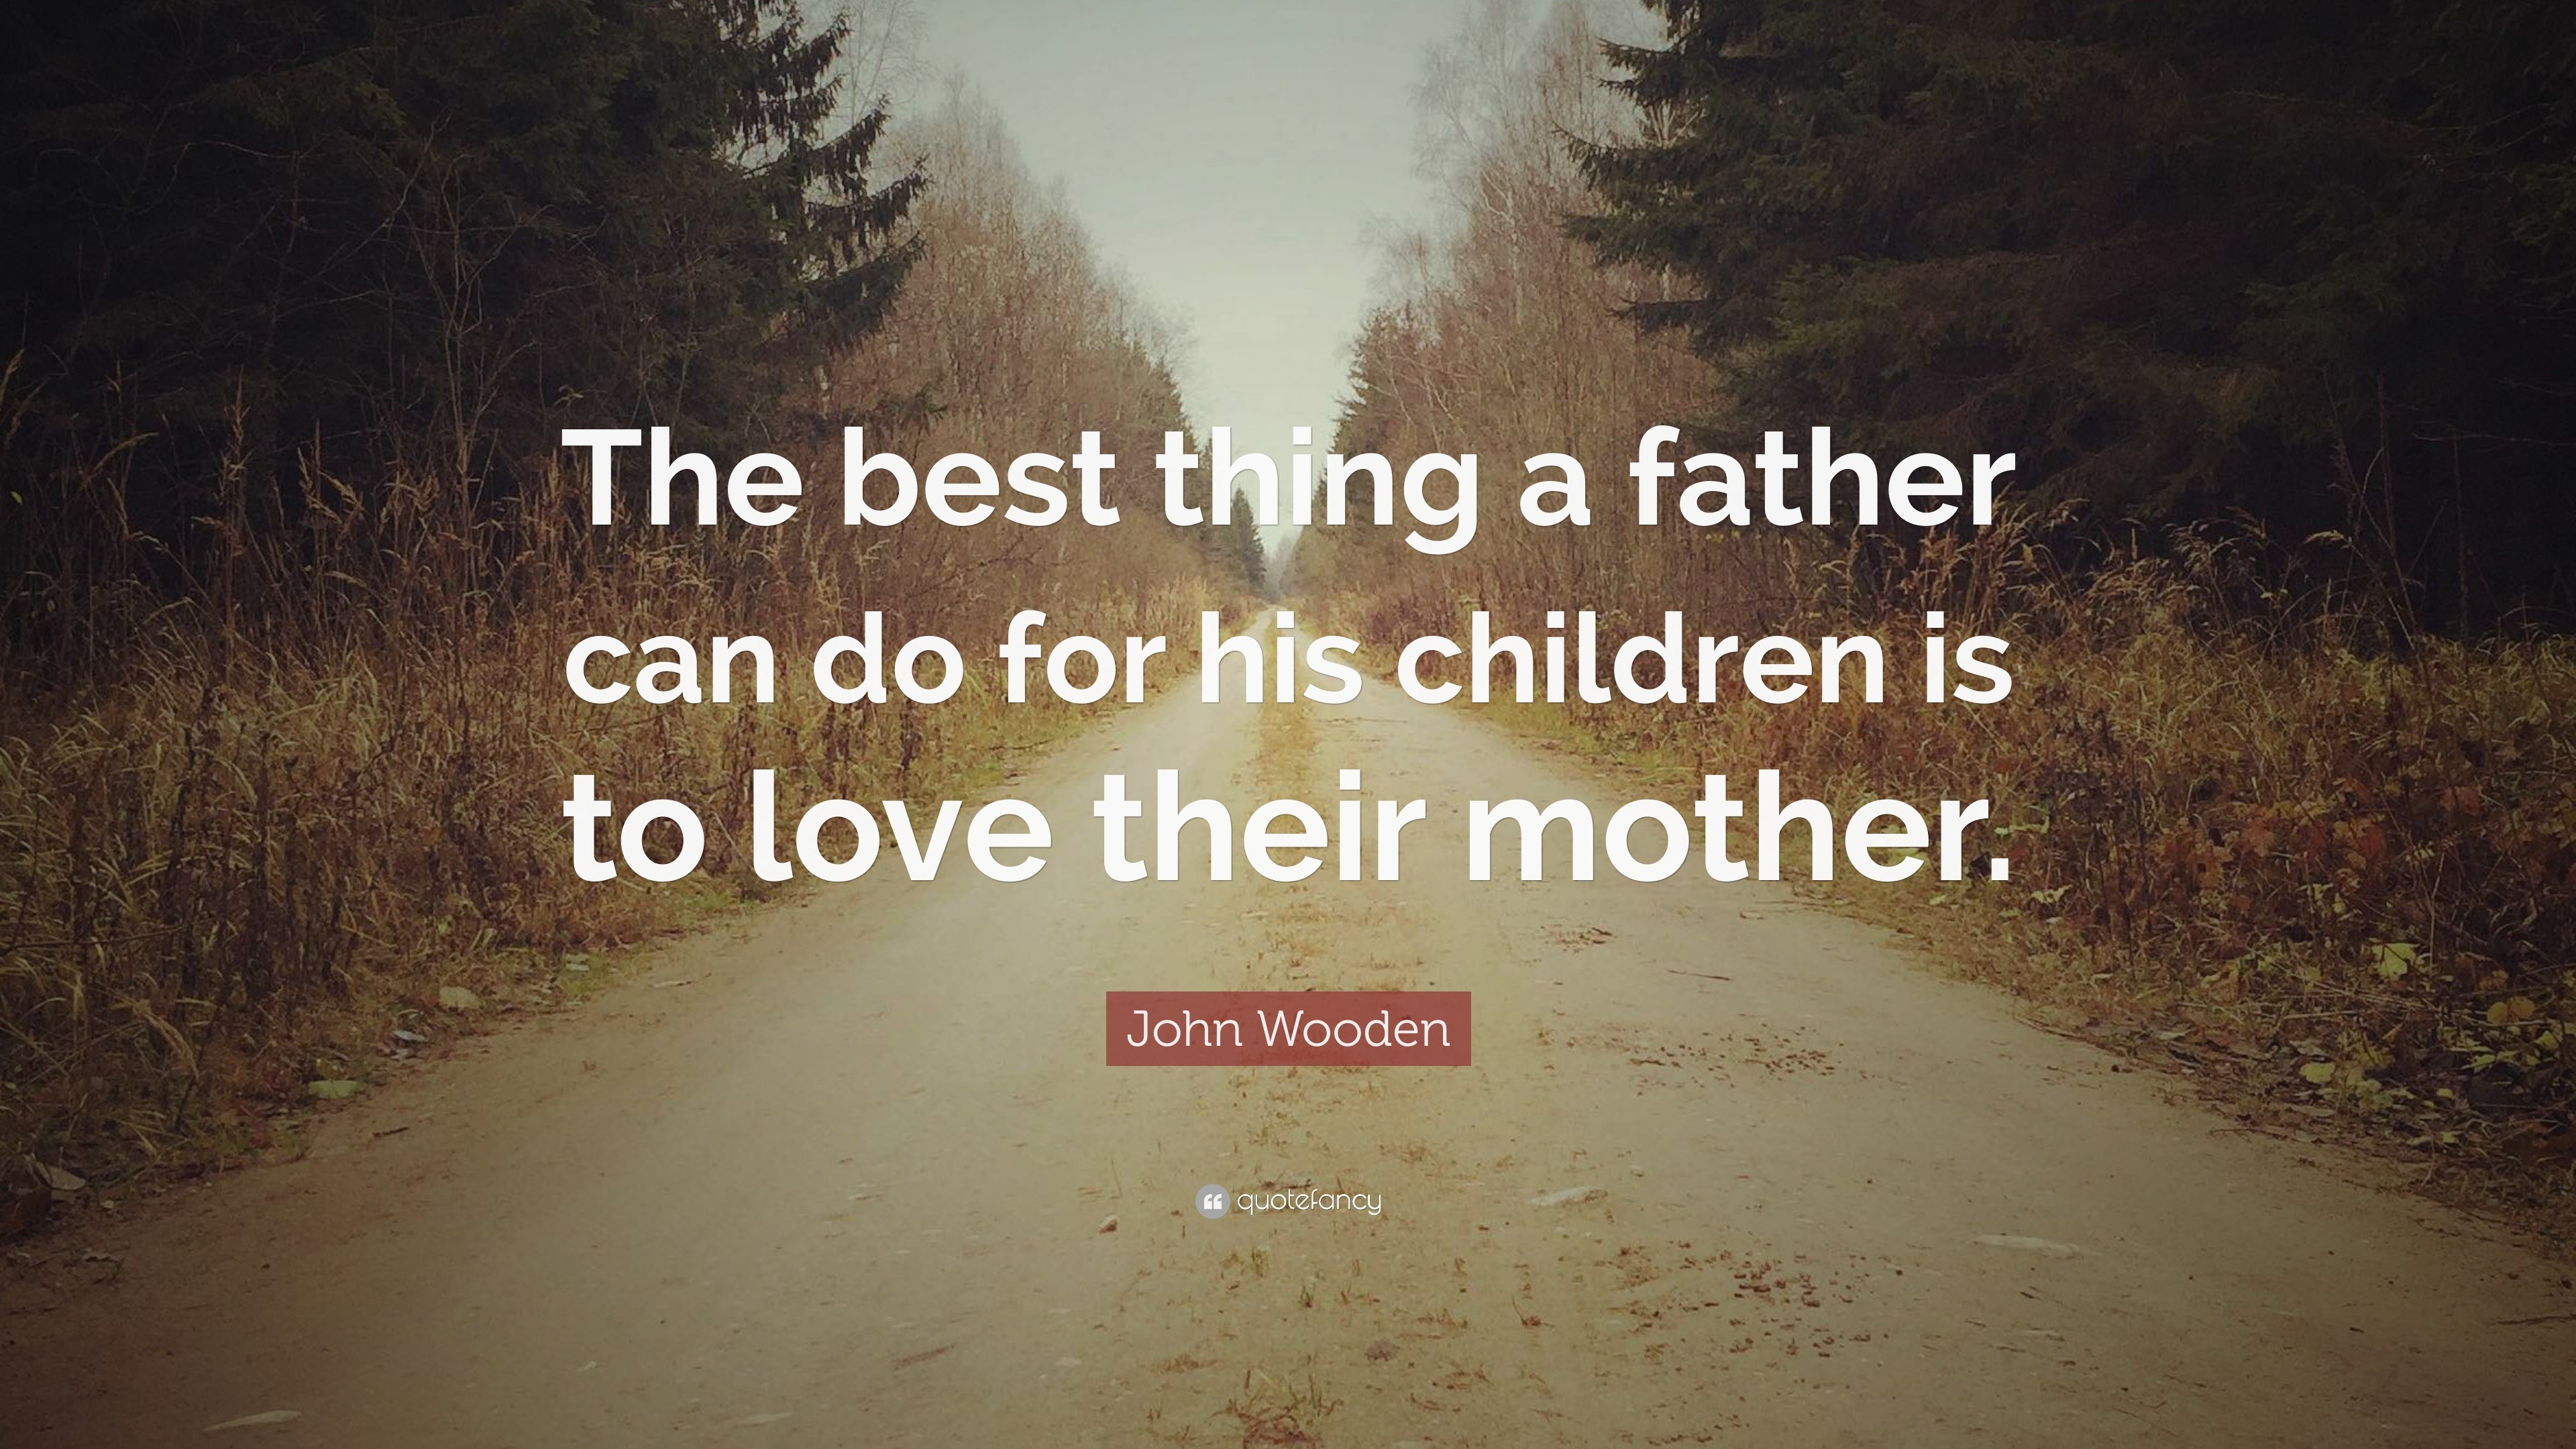 John Wooden Quote “The best thing a father can do for his